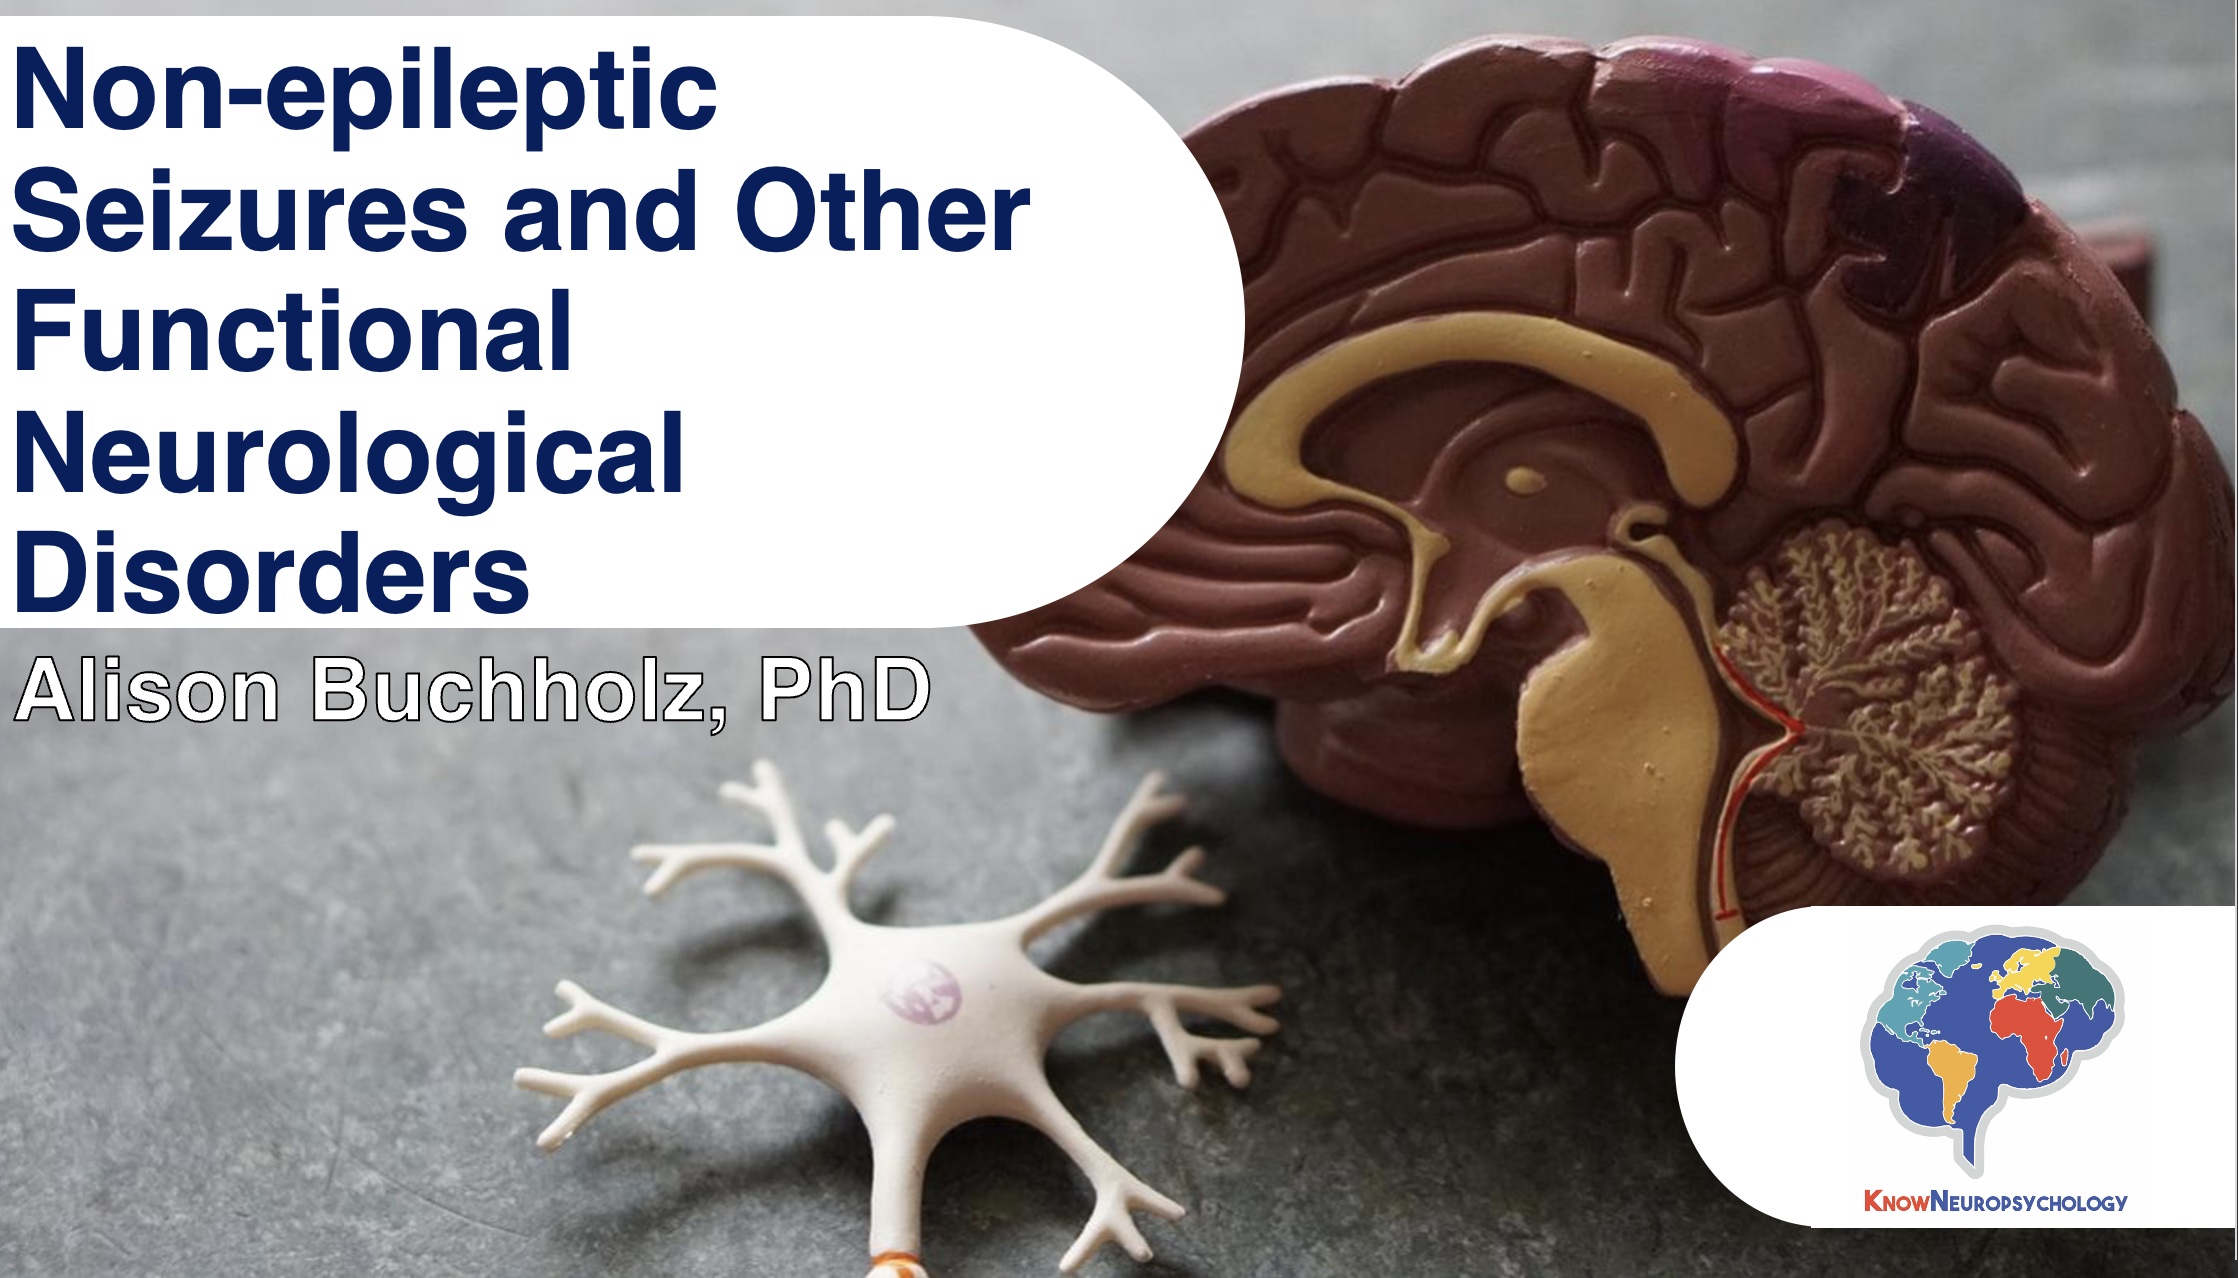 Non-epileptic seizures and other functional neurological disorders with Dr. Alison Buchholz